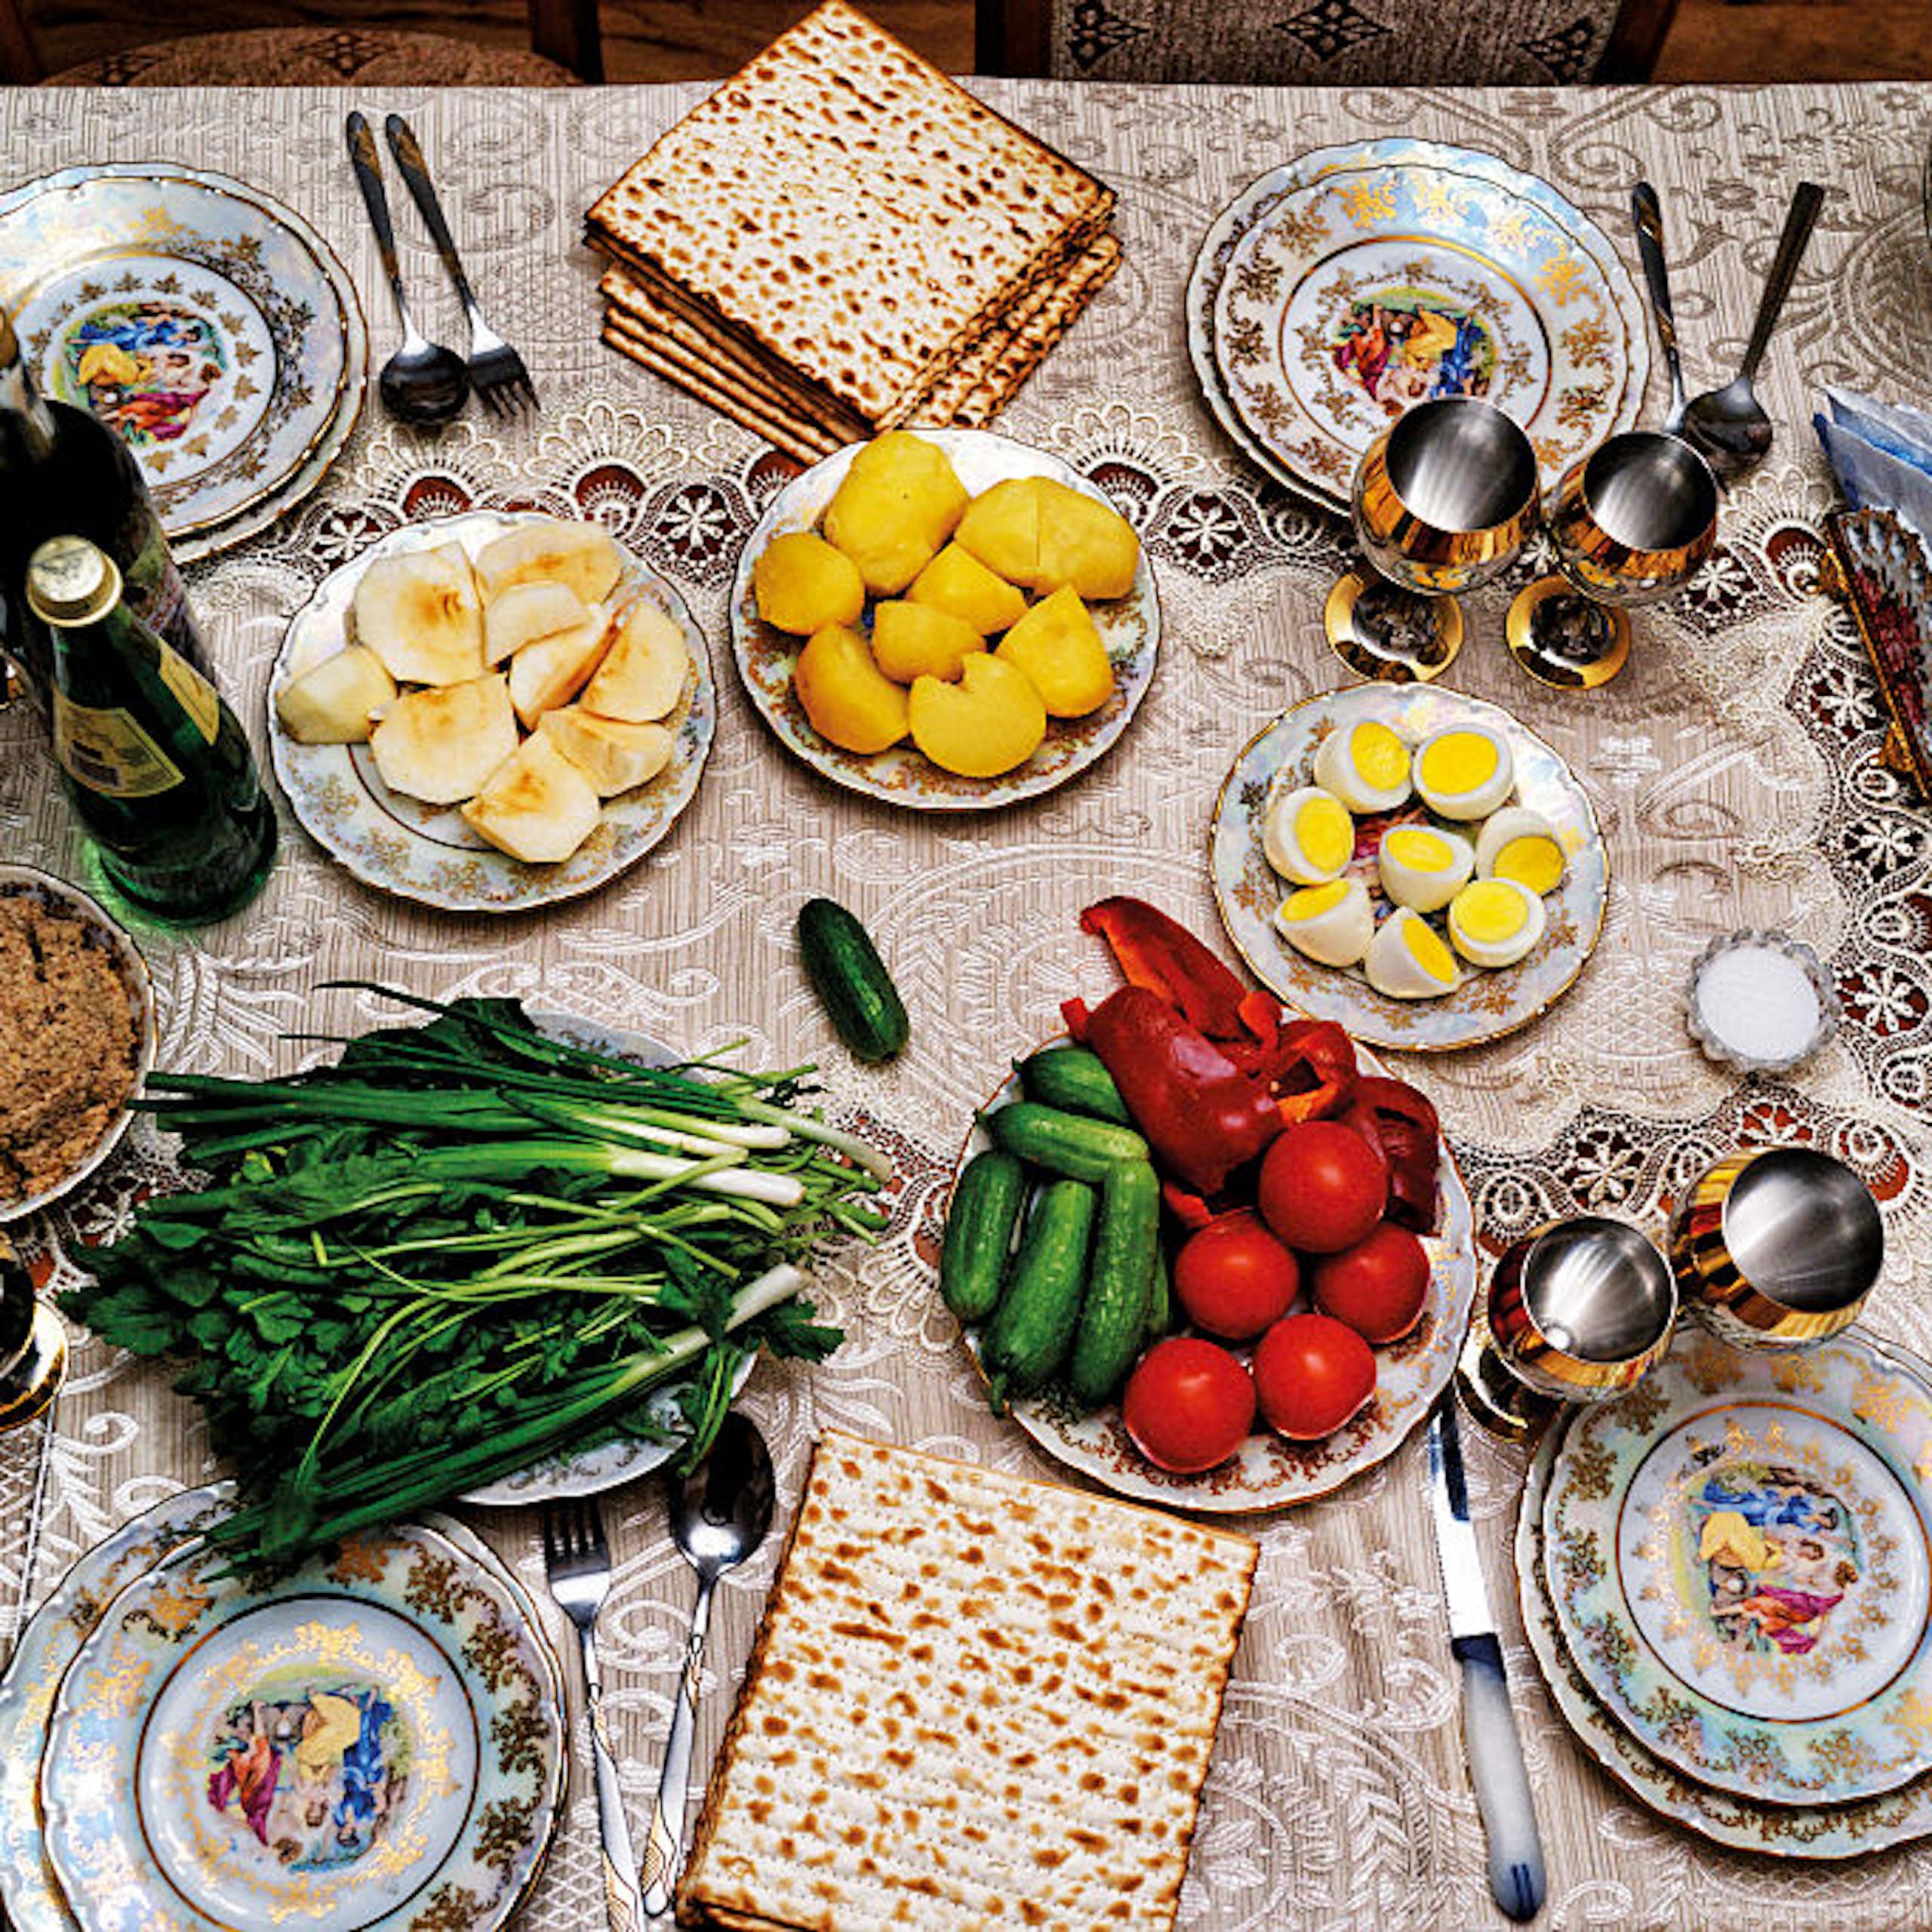 A table set with plates of fruit, vegetables, eggs and flatbread.